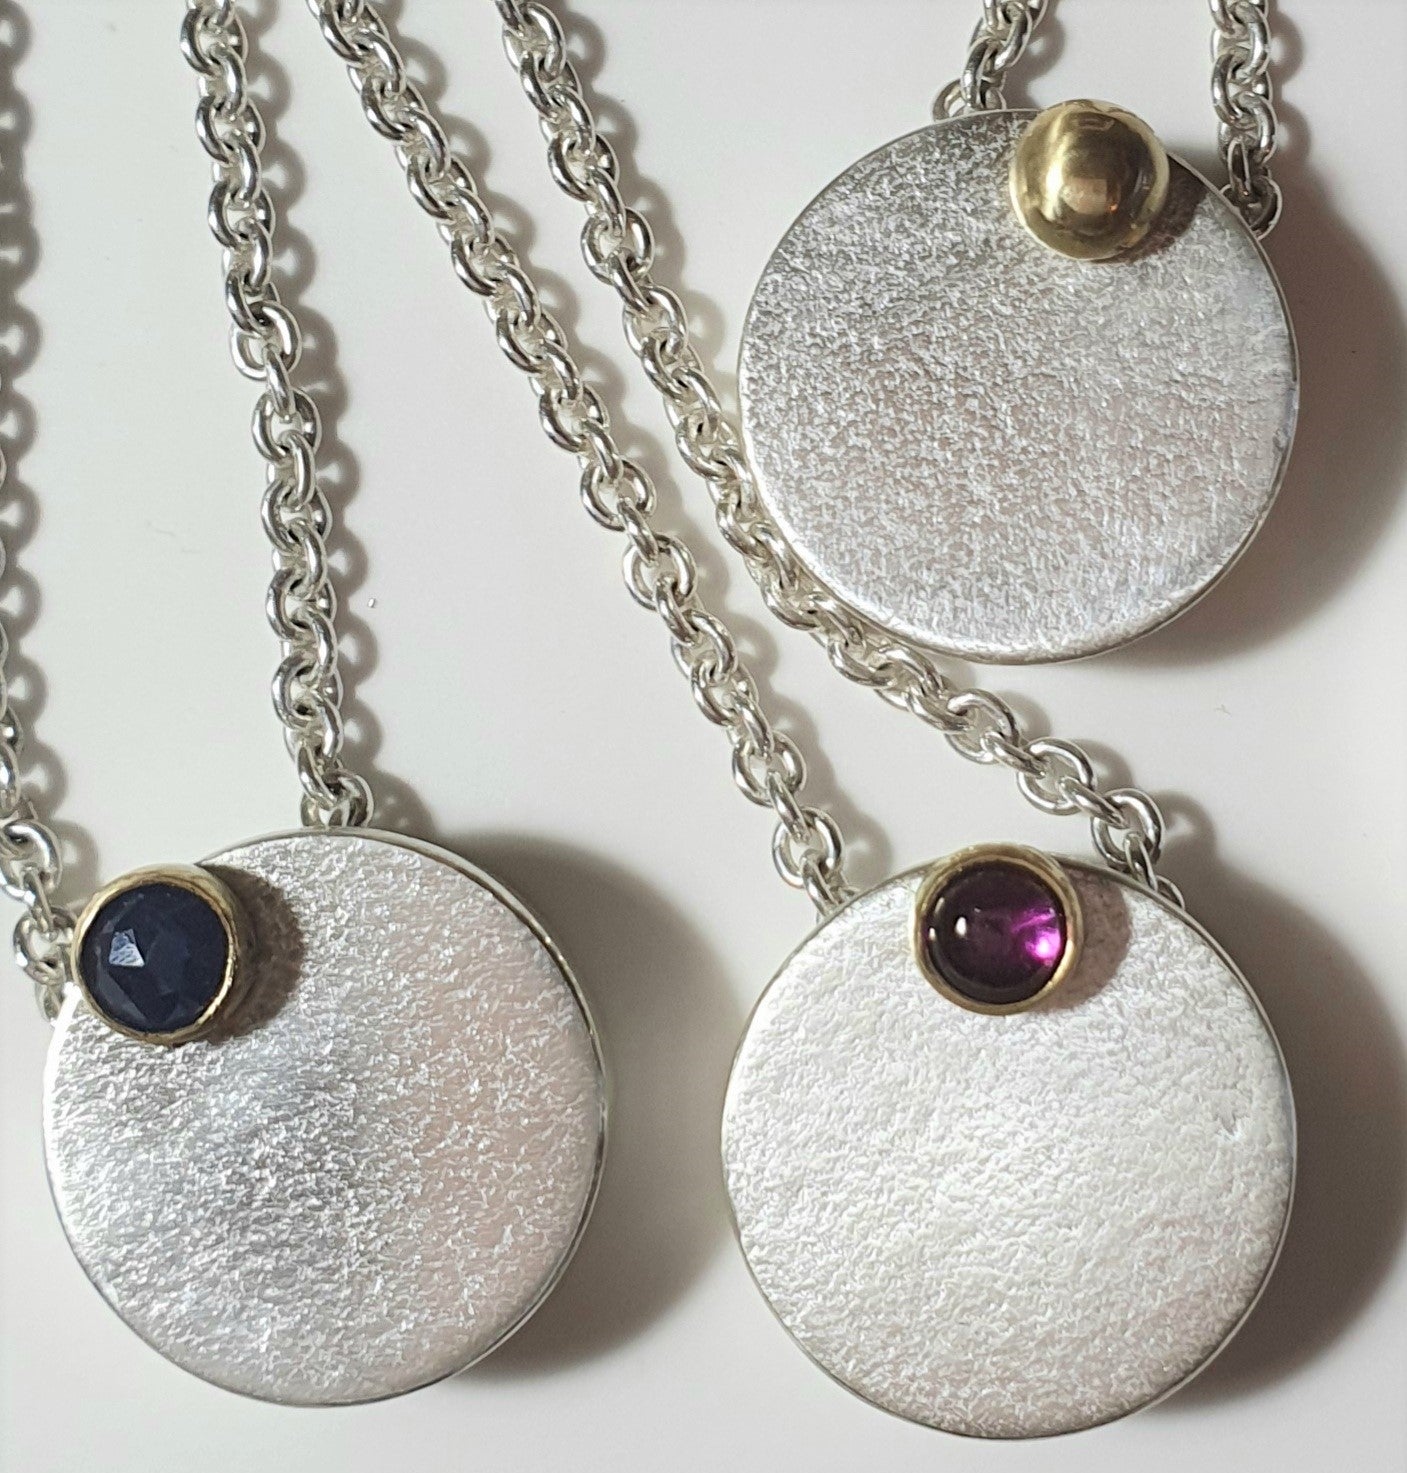 Midcentury moon lockets with rosecut sapphire, gold ball and amethyst  www.barbaraspence.co.uk